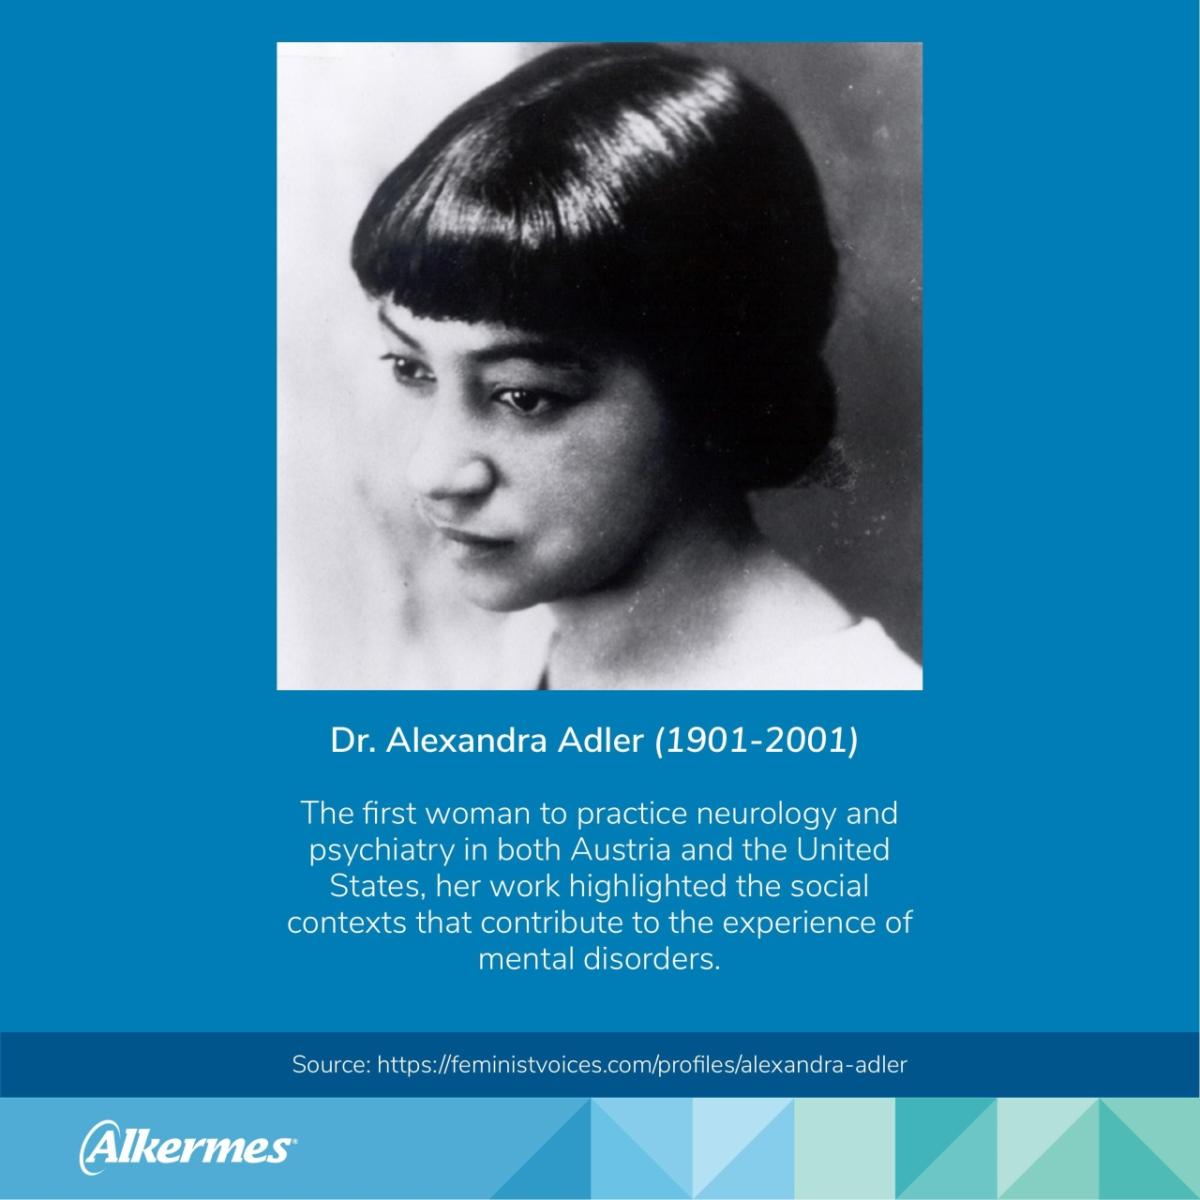 Dr. Alexandra Adler (1901-2001) The first woman to practice neurology and psychiatry in both Austria and the United States, her work highlighted the social contexts that contribute to the experience of mental disorders. Source: https://feministvoices.com/profiles/alexandra-adler